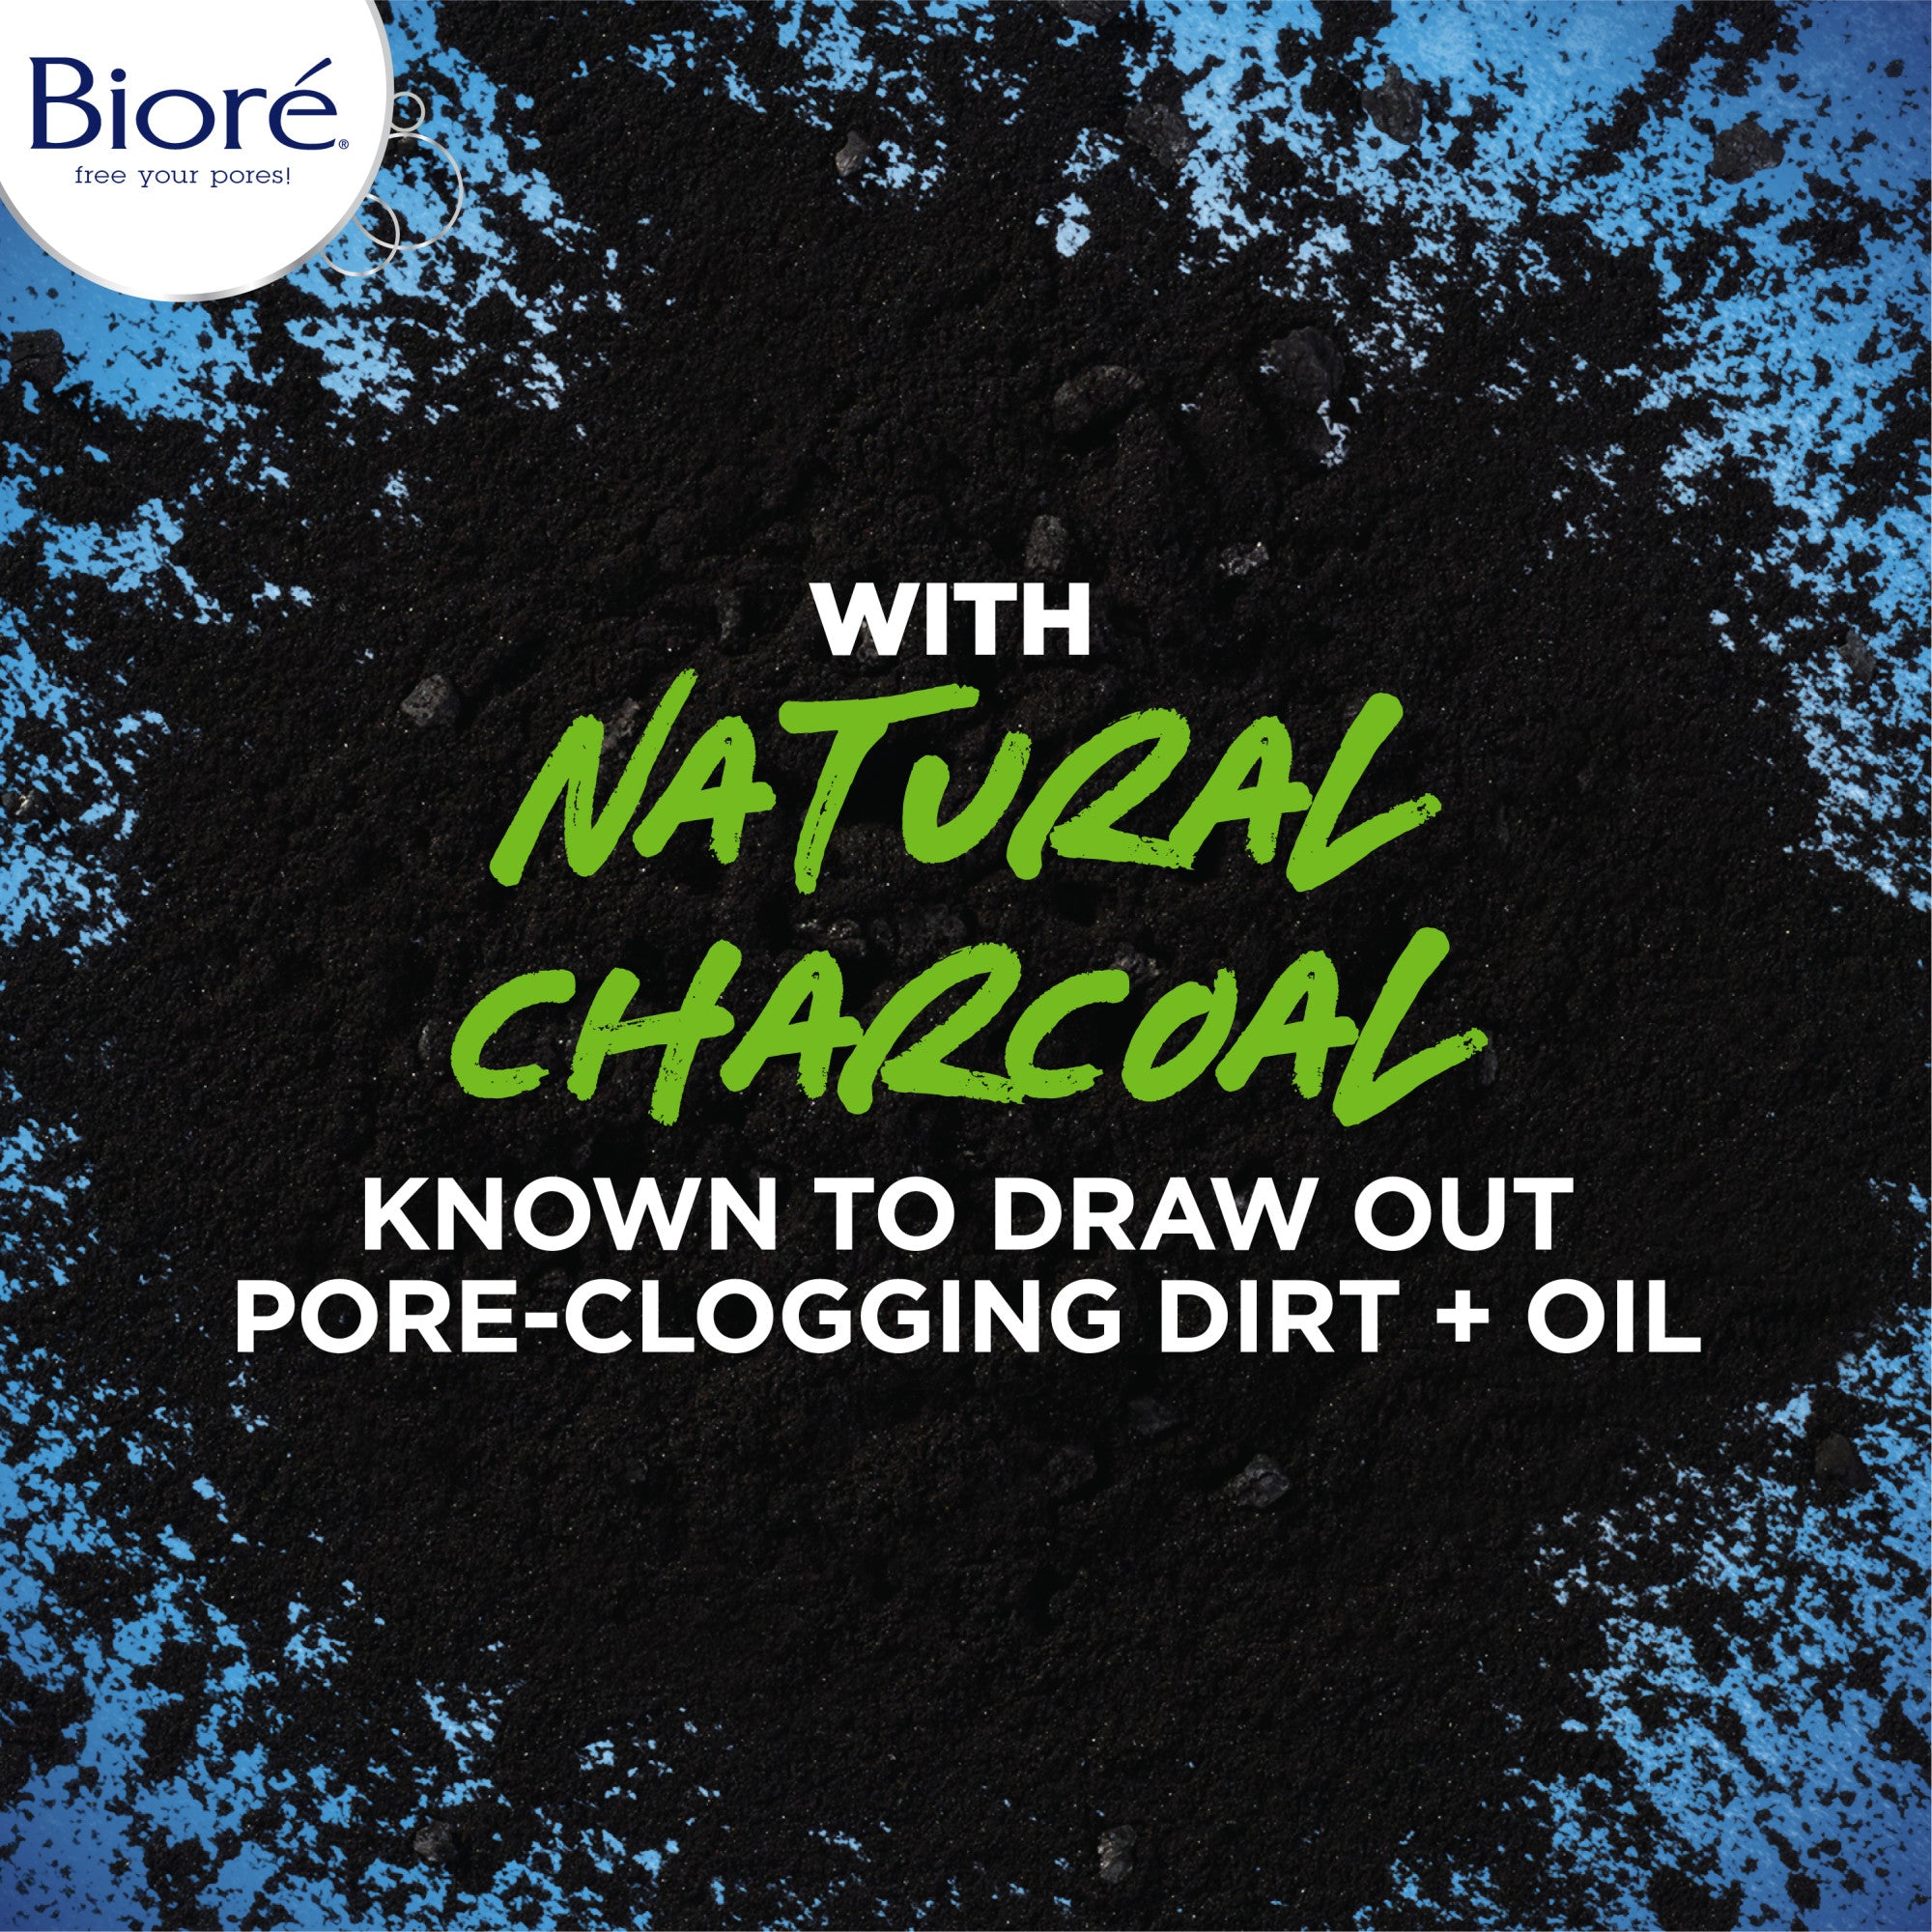 With natural charcoal known to draw out pore-clogging dirt and oil.